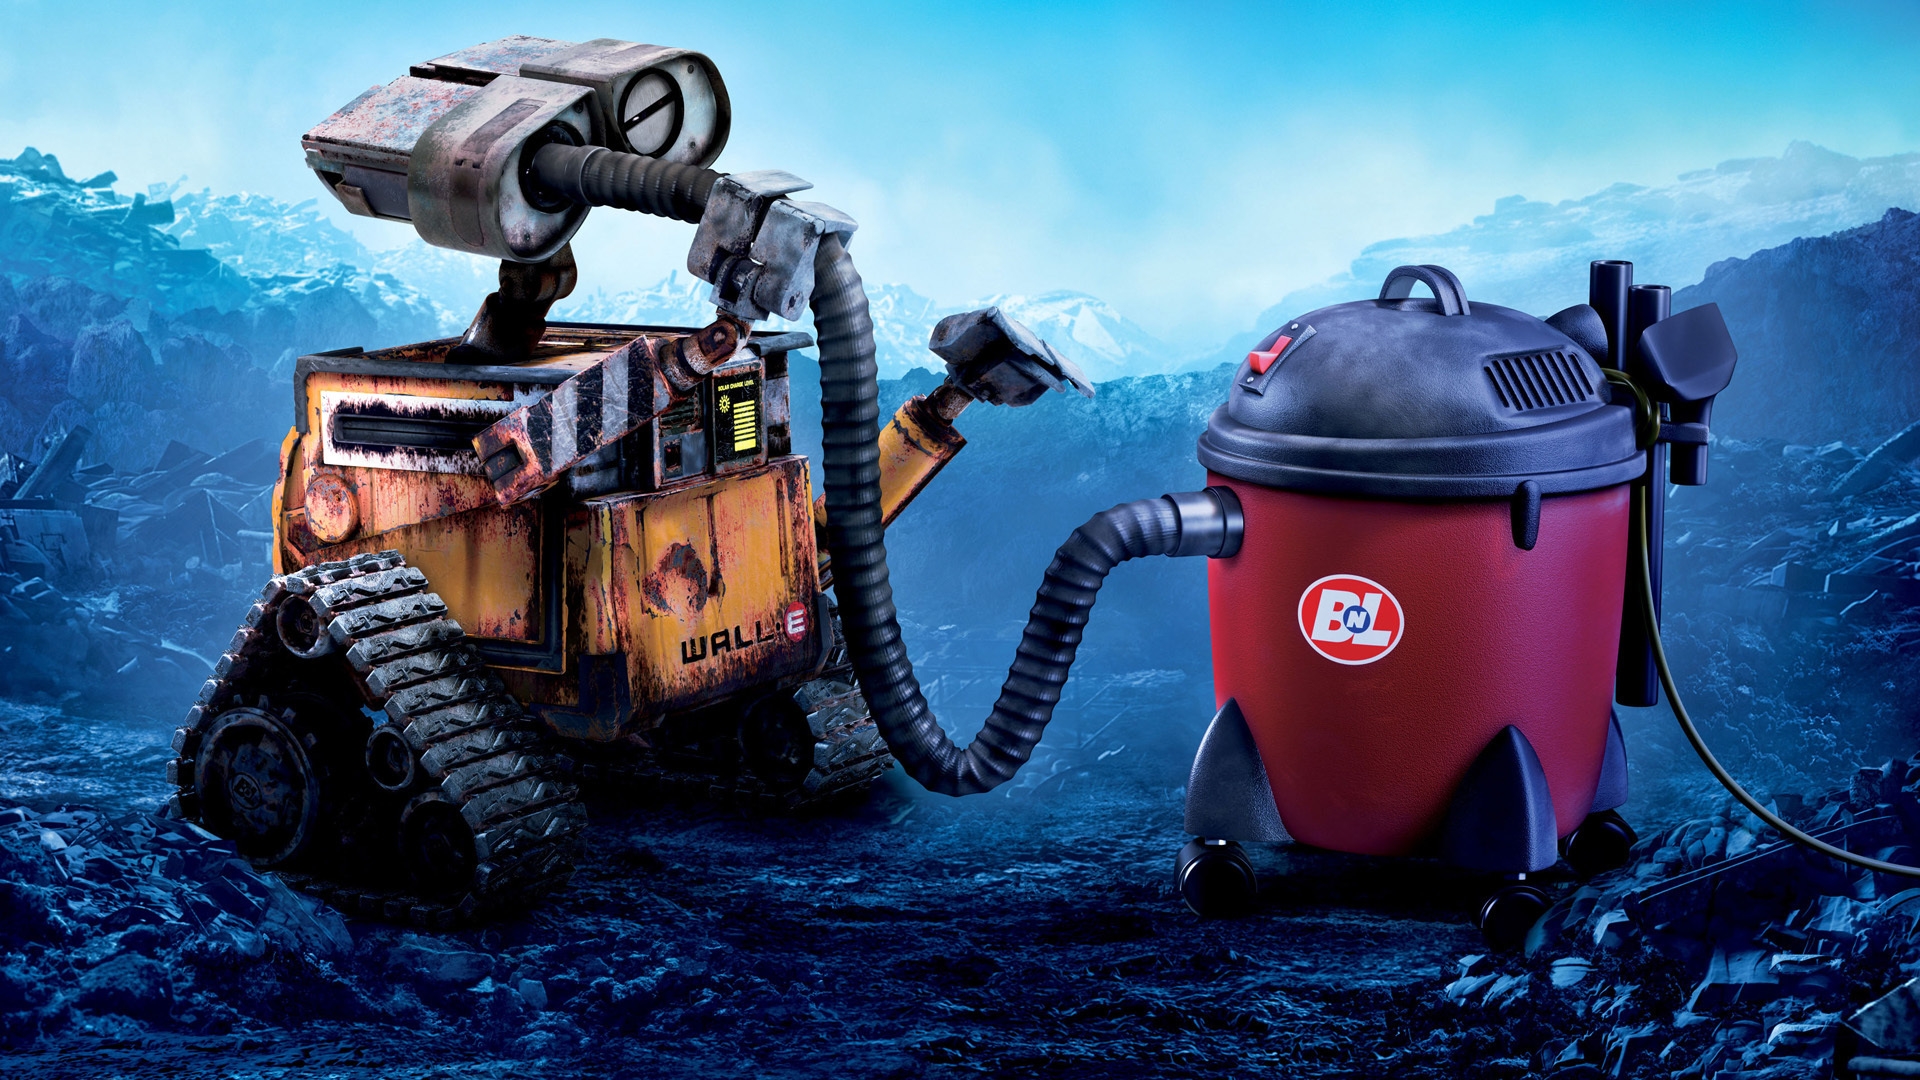 WALL-E Vacuum for 1920 x 1080 HDTV 1080p resolution